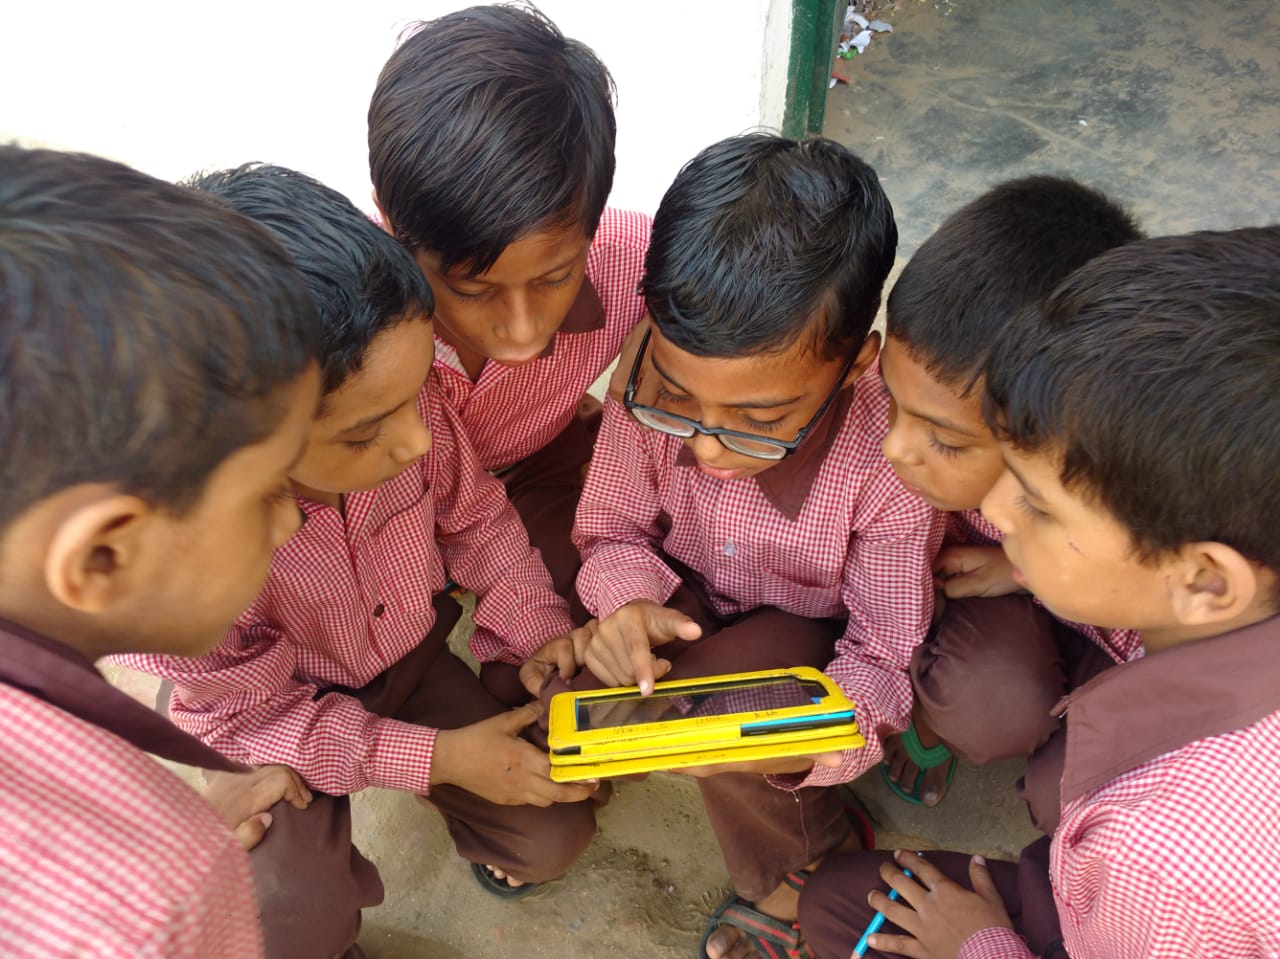 Nucleus CSR enforcing Quality Education in the underserved districts of Noida